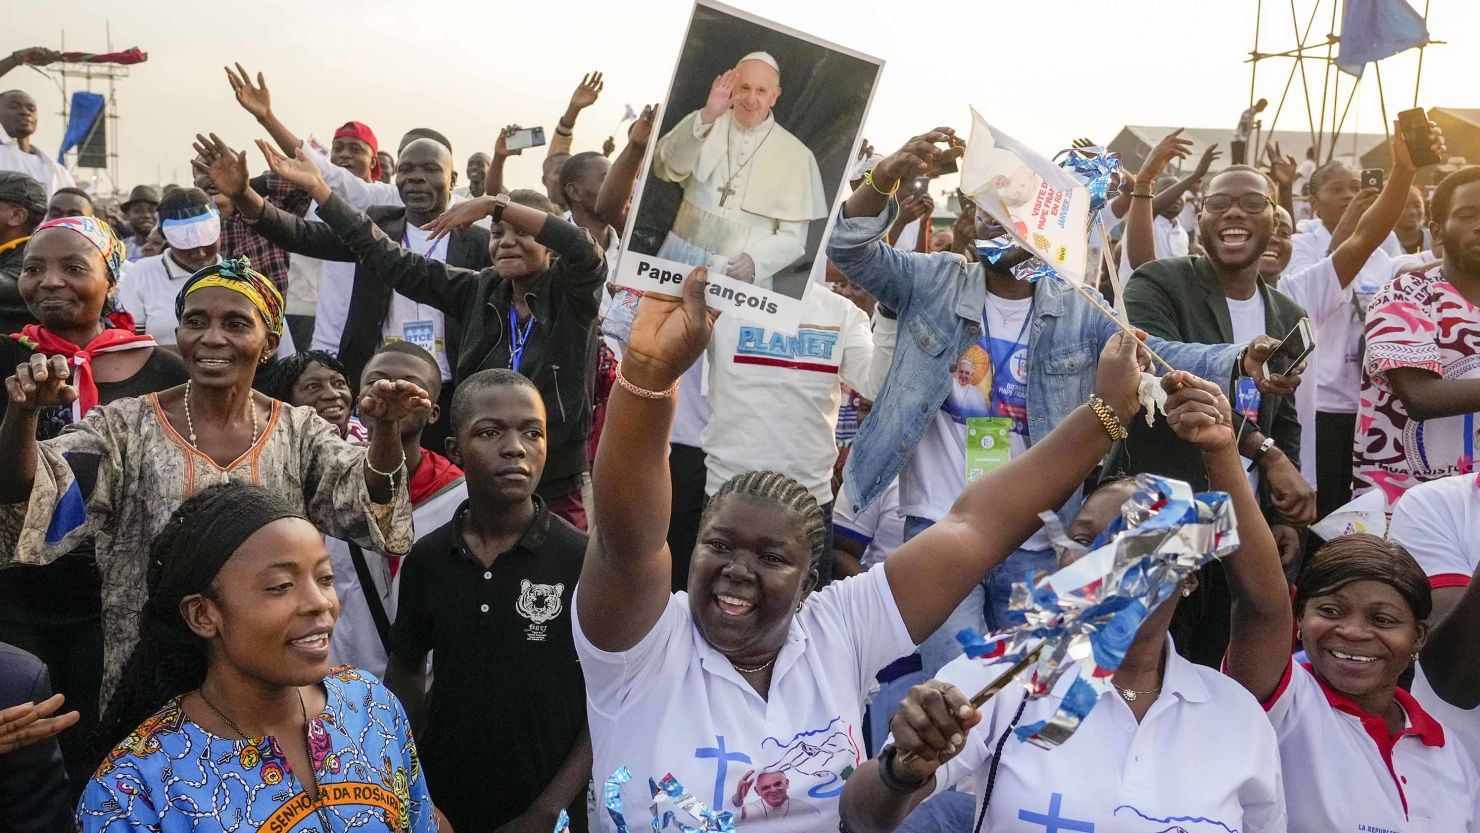 People wait for the arrival of Pope Francis at N'Dolo Airport in Kinshasa in the Democratic Republic of the Congo on Wednesday.